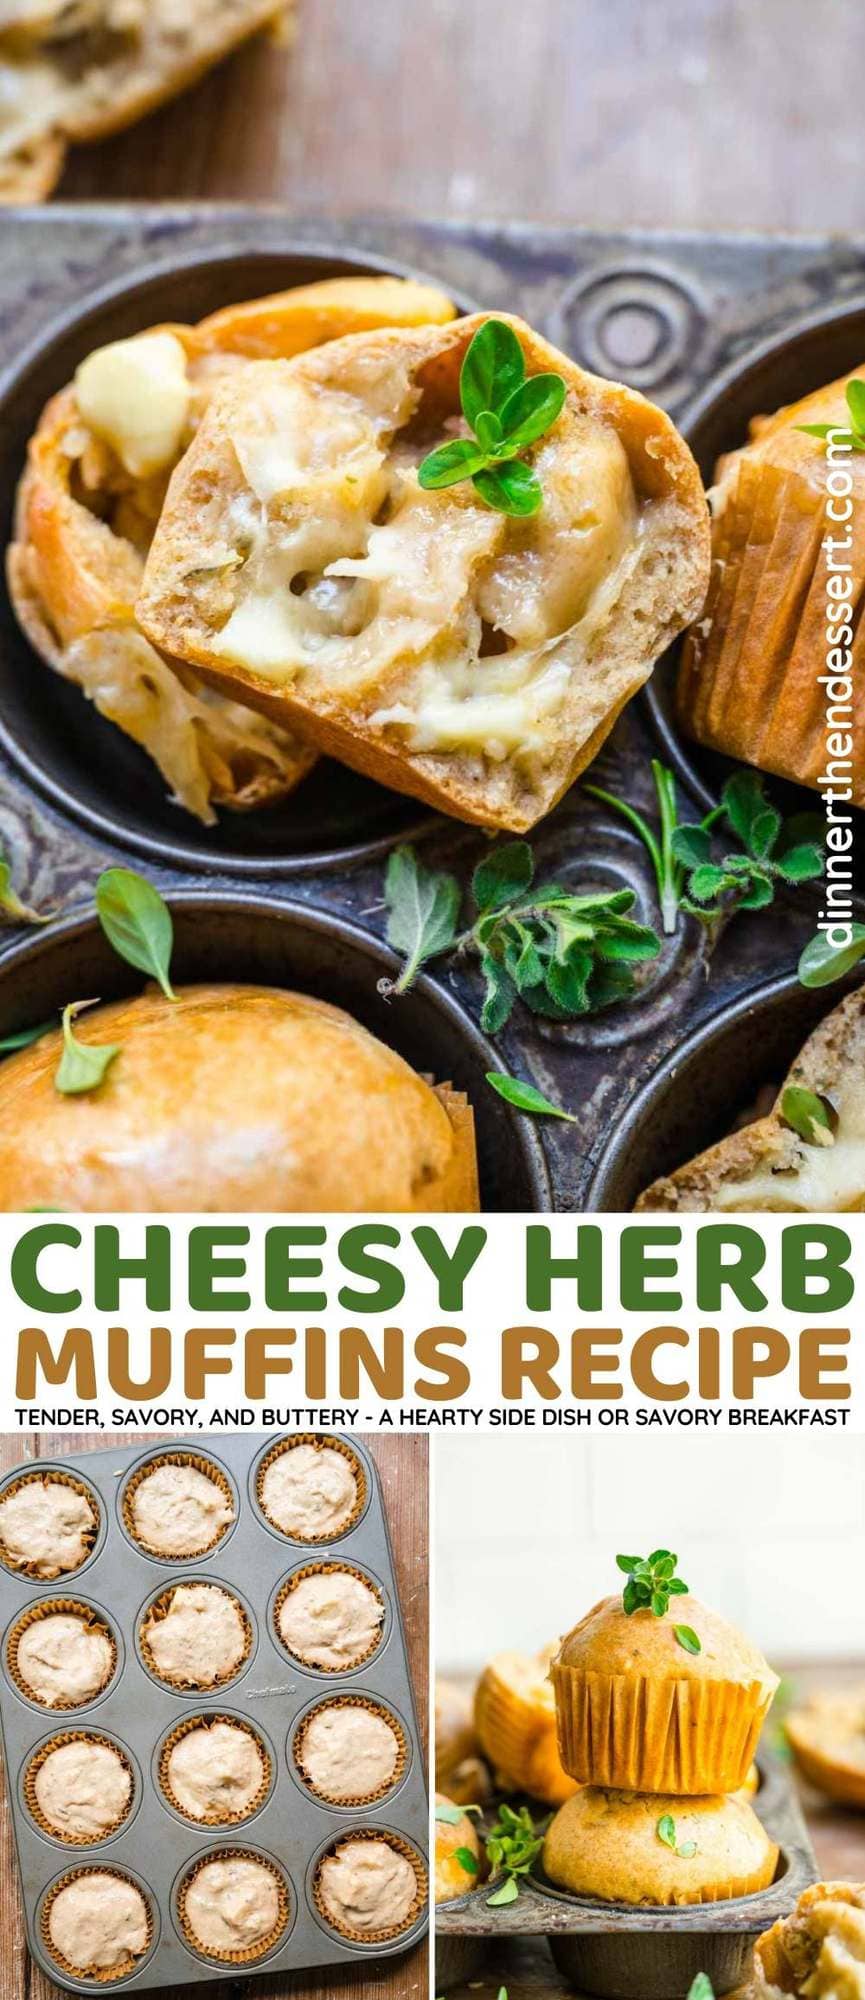 Cheesy Herb Muffins collage